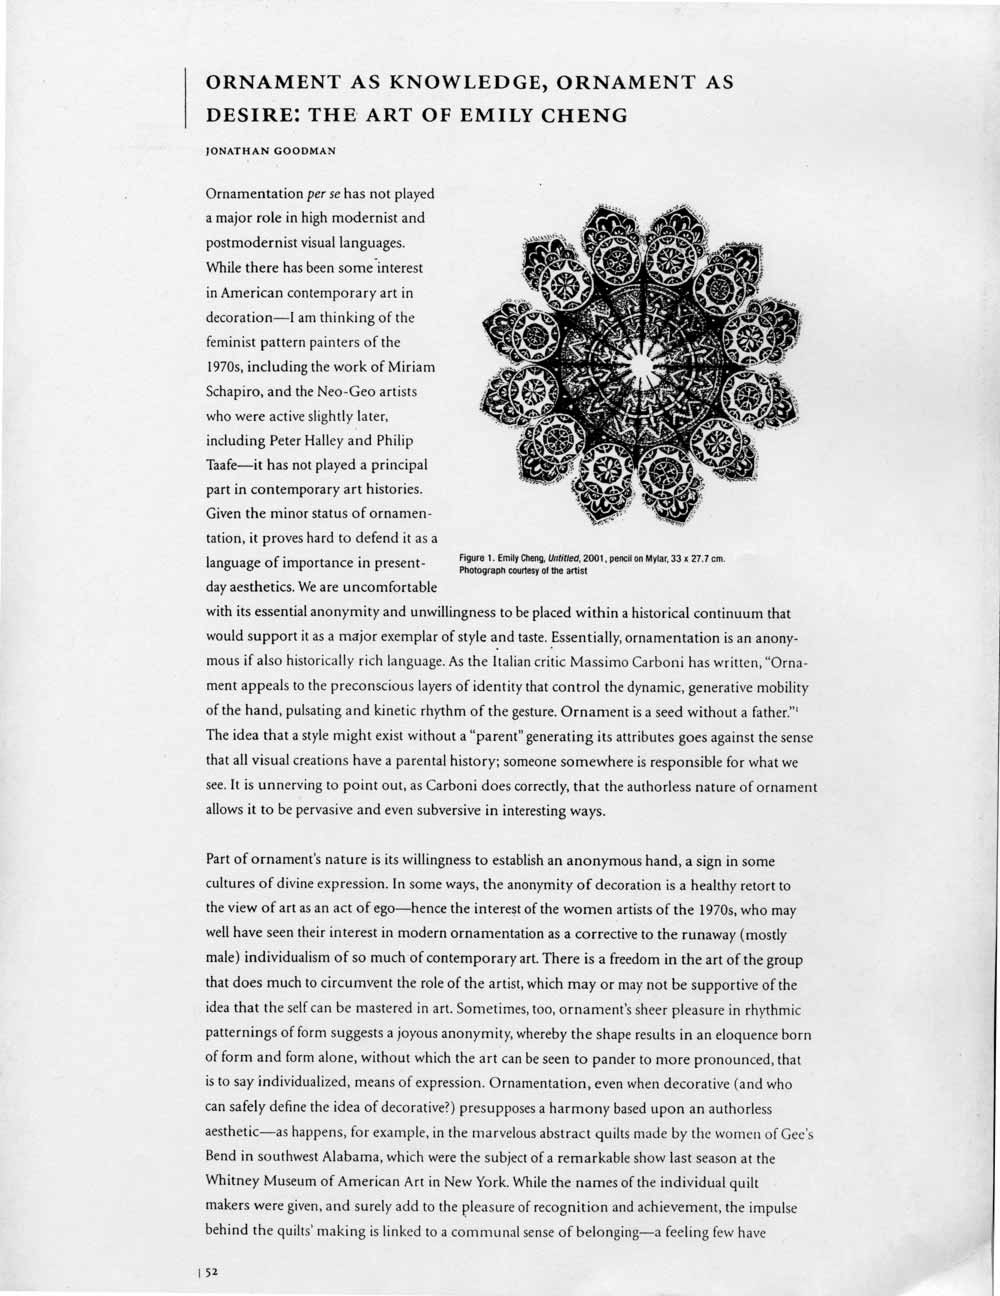 Ornament as Knowledge, pg 1